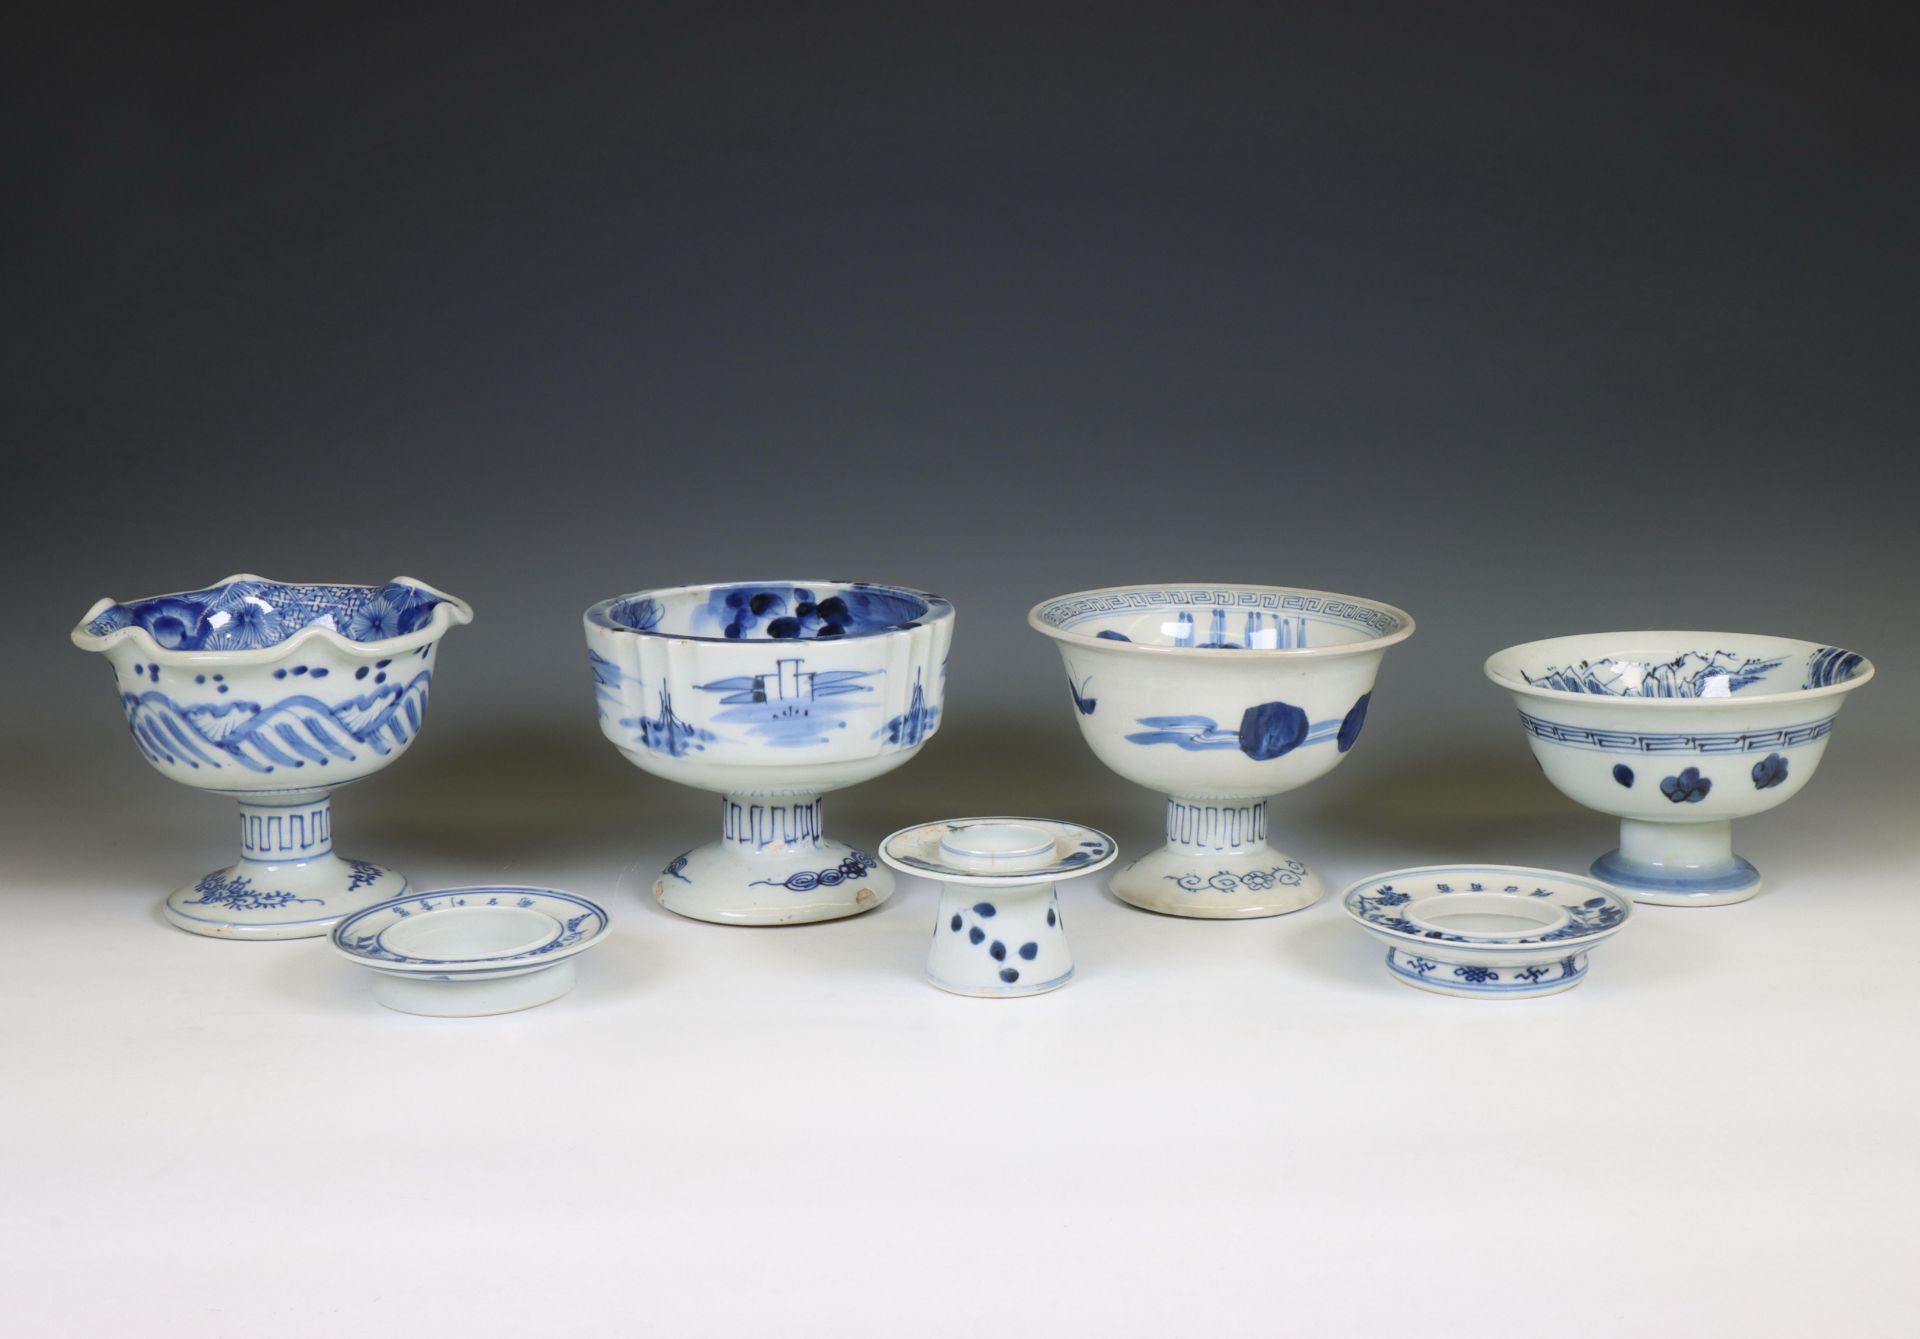 Japan, a collection of blue and white porcelain sake-cup washers and holders, 20th century,